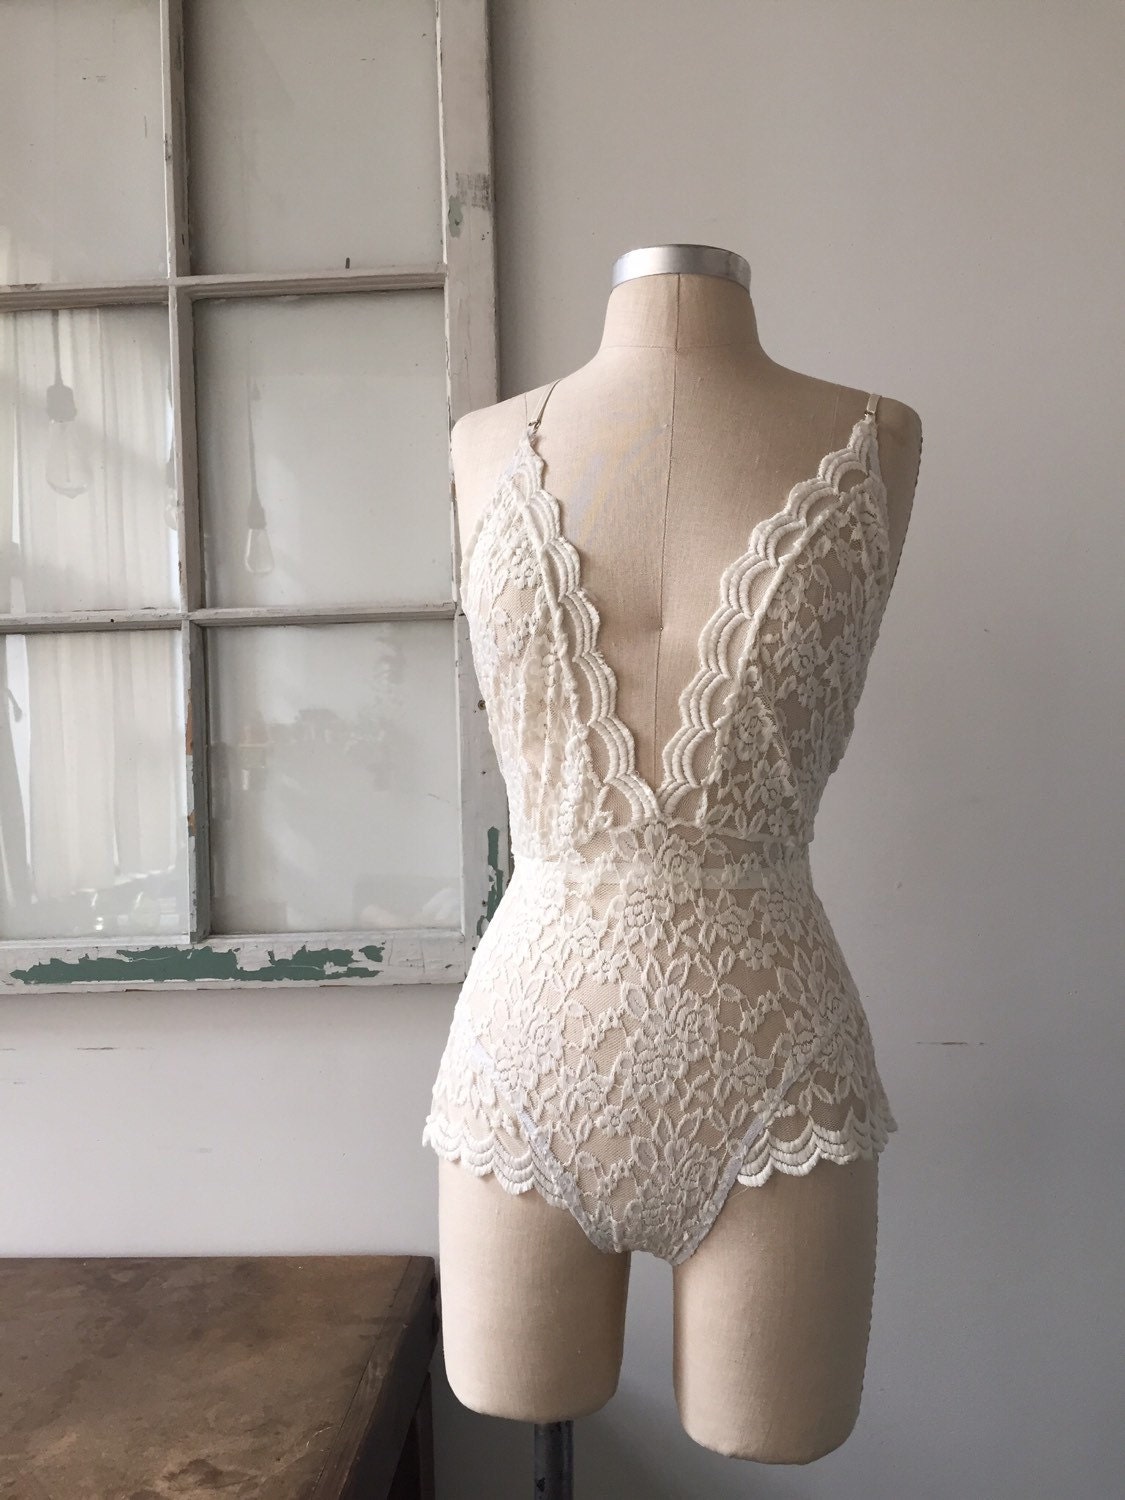 Bride To Be Ivory Lace Lingerie Teddy By Siobhanbarrett On Etsy